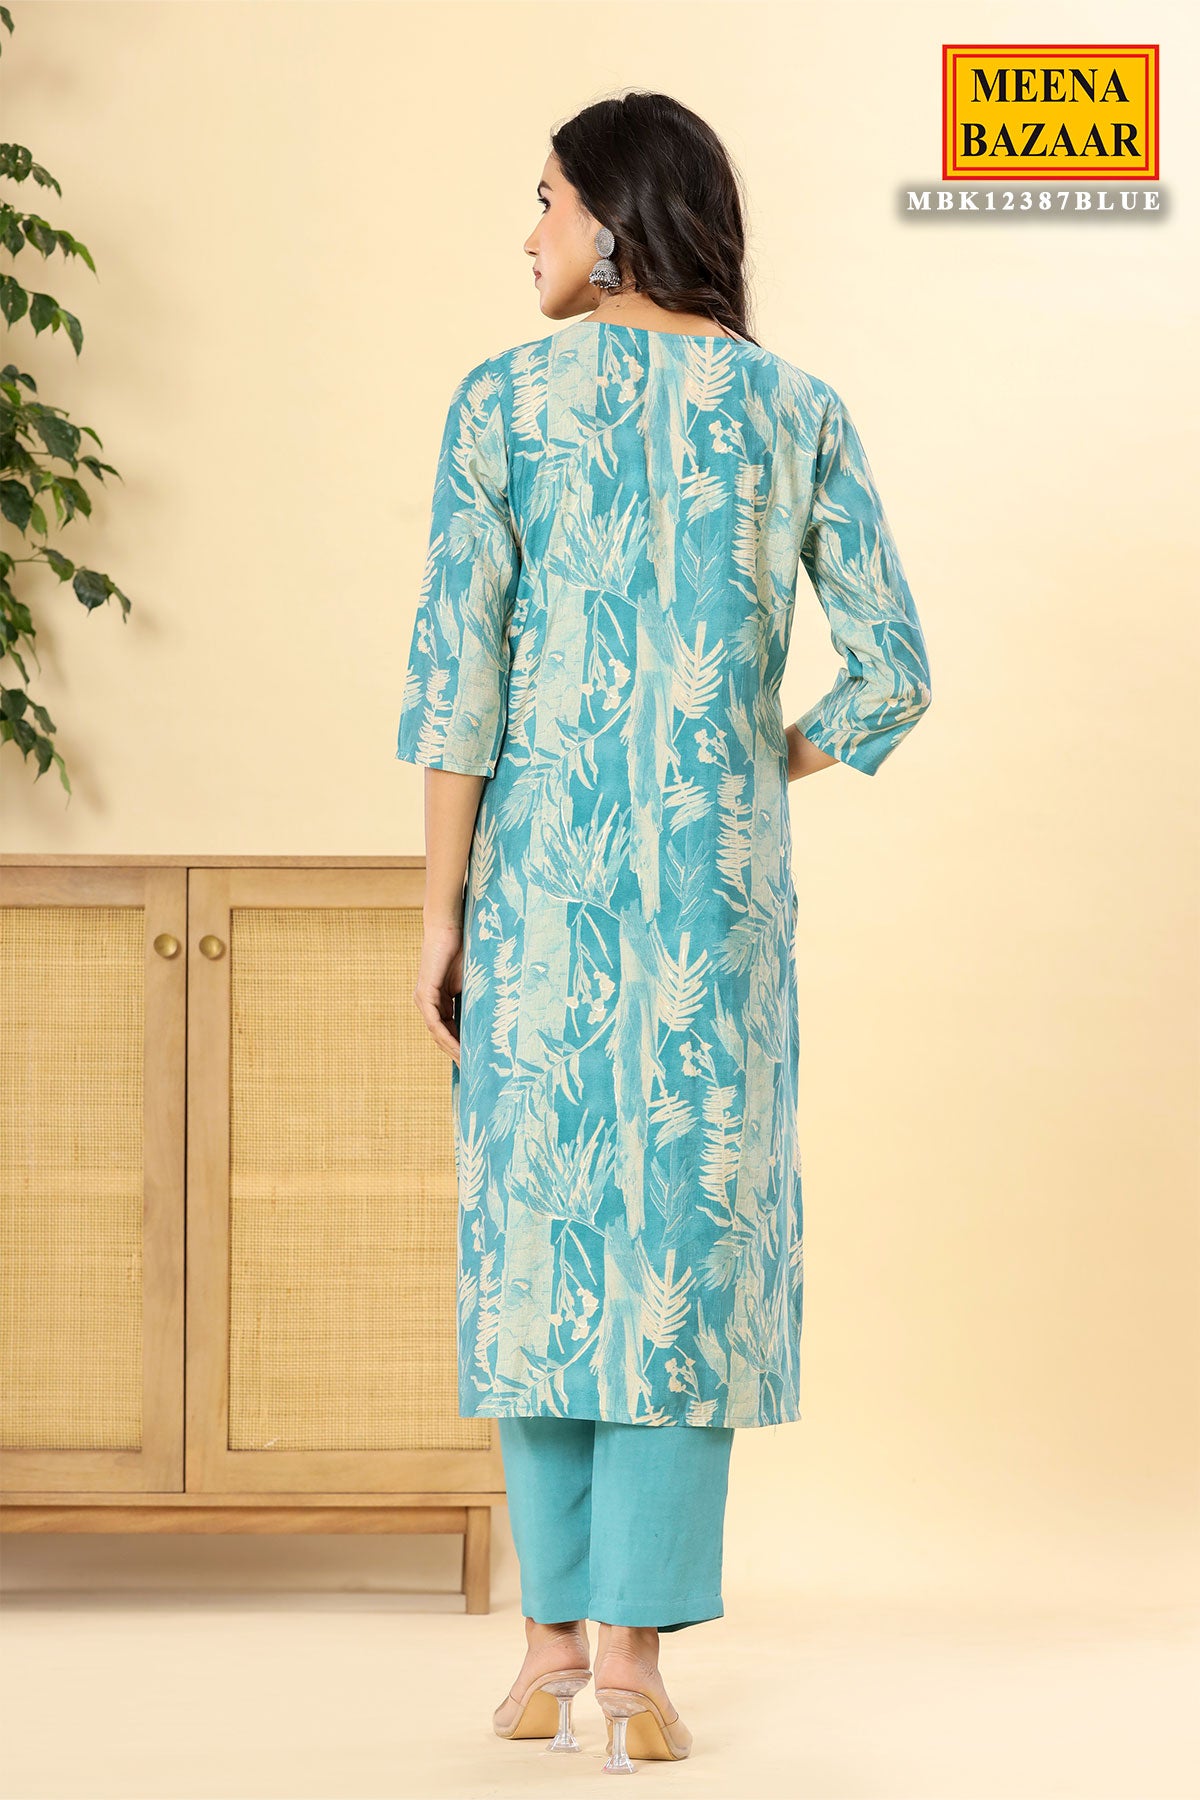 Blue Muslin Printed Sequins and Cutdana Embroidered Suit